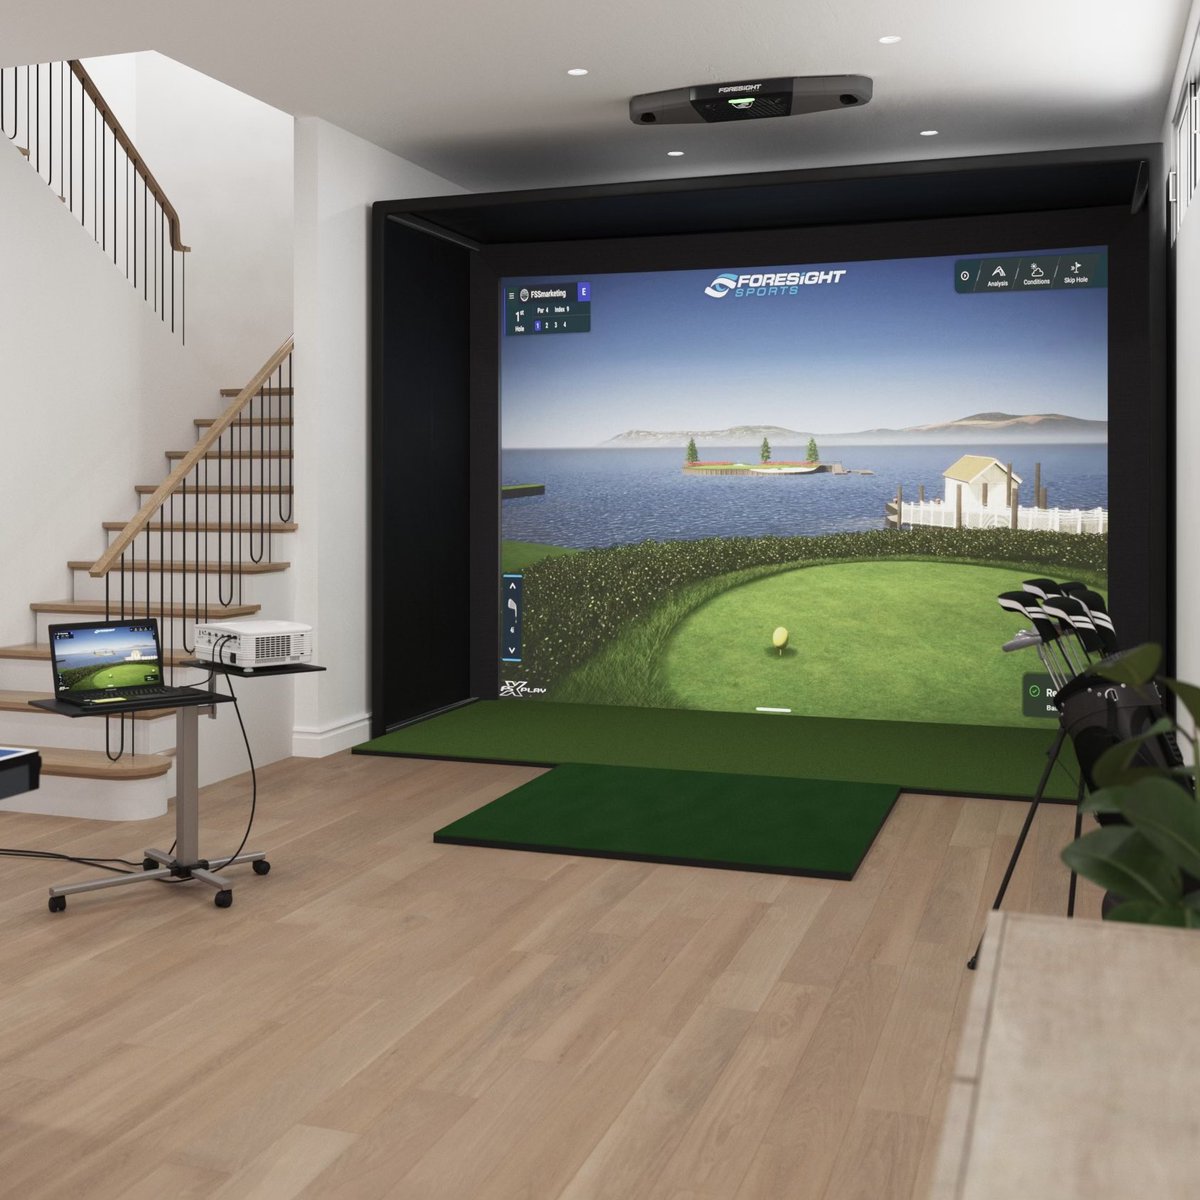 Never miss a round or practice session again and experience the most true-to-life golf simulation experience for any-time, any-weather golf. The Falcon is available with all our premium simulator solutions including the revolutionary Sim-in-a-Box. #foresightsportseurope #falcon